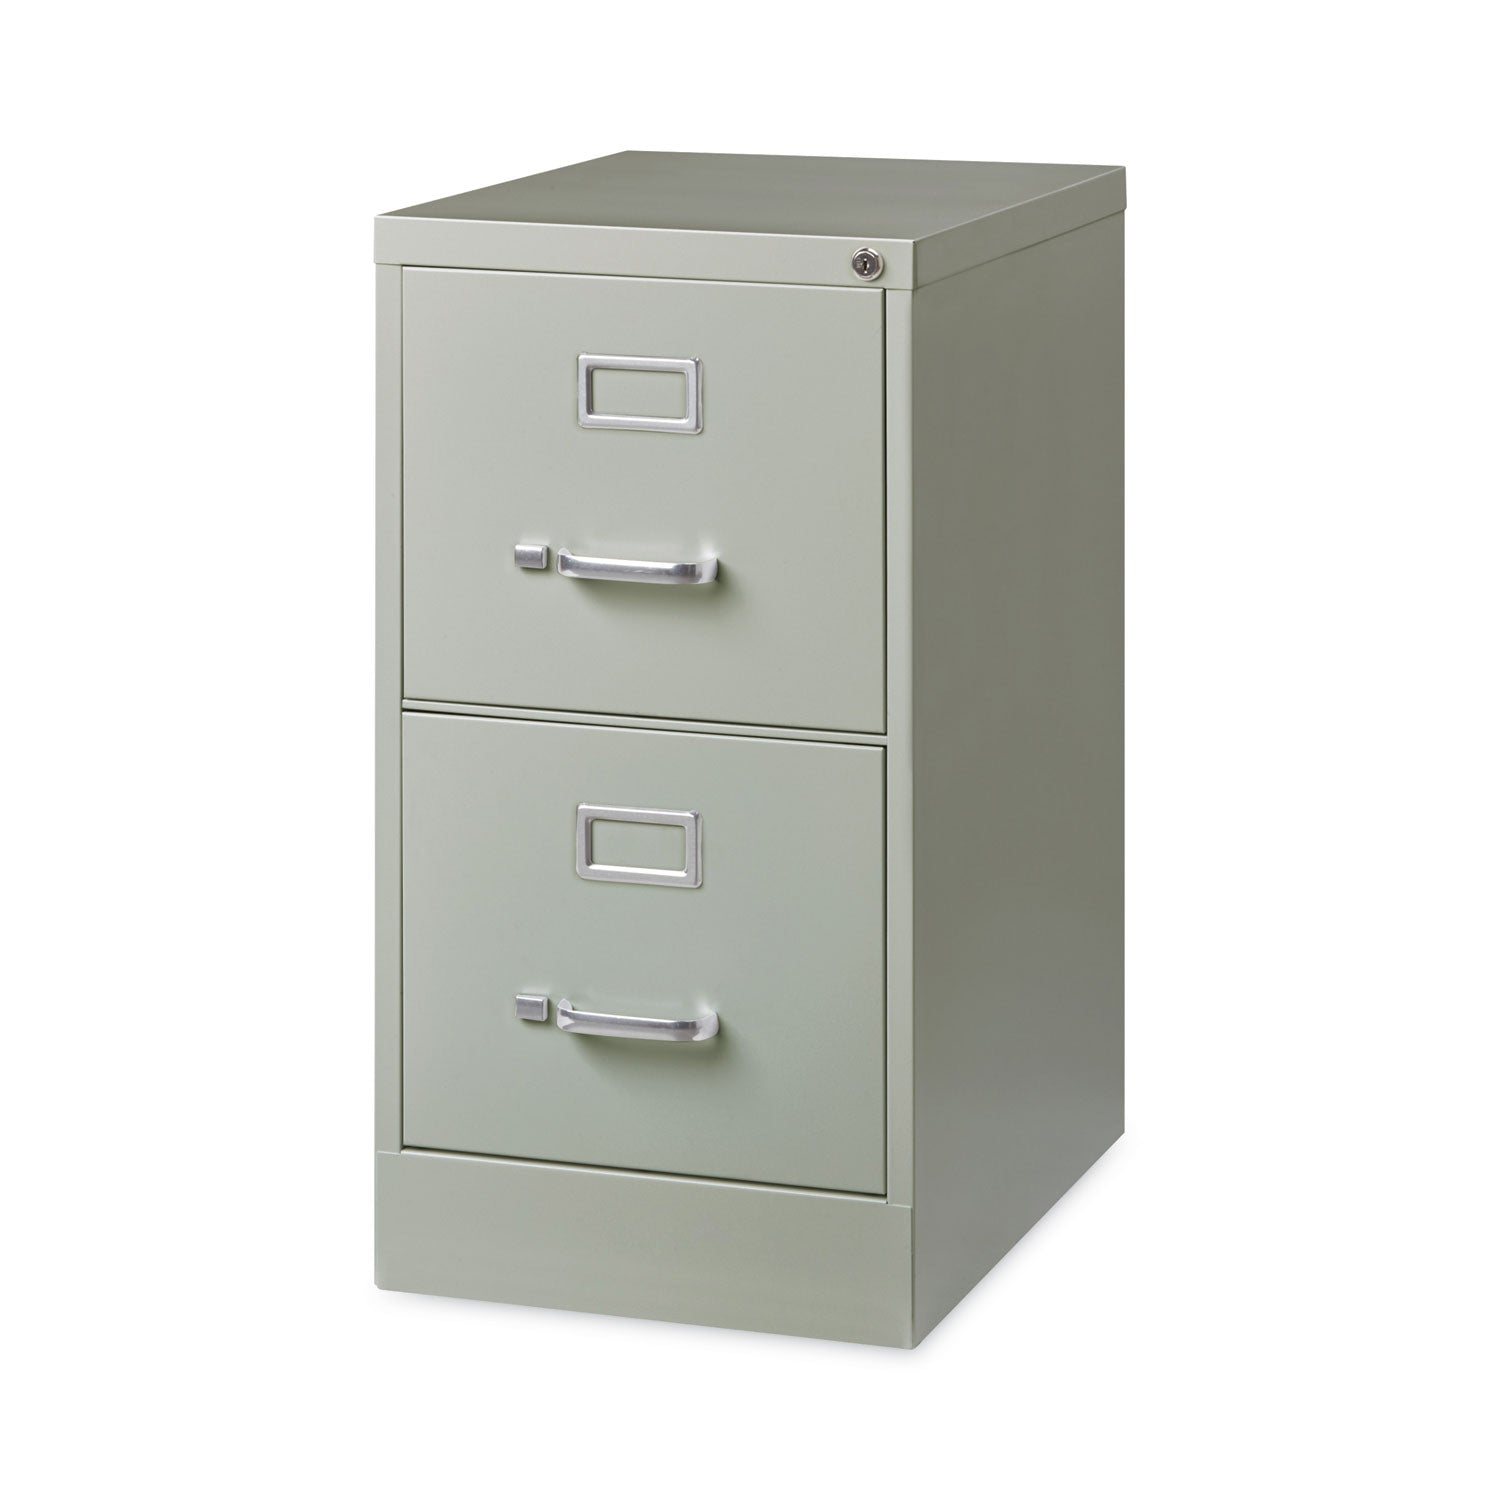 vertical-letter-file-cabinet-2-letter-size-file-drawers-light-gray-15-x-22-x-2837_hid22732 - 2